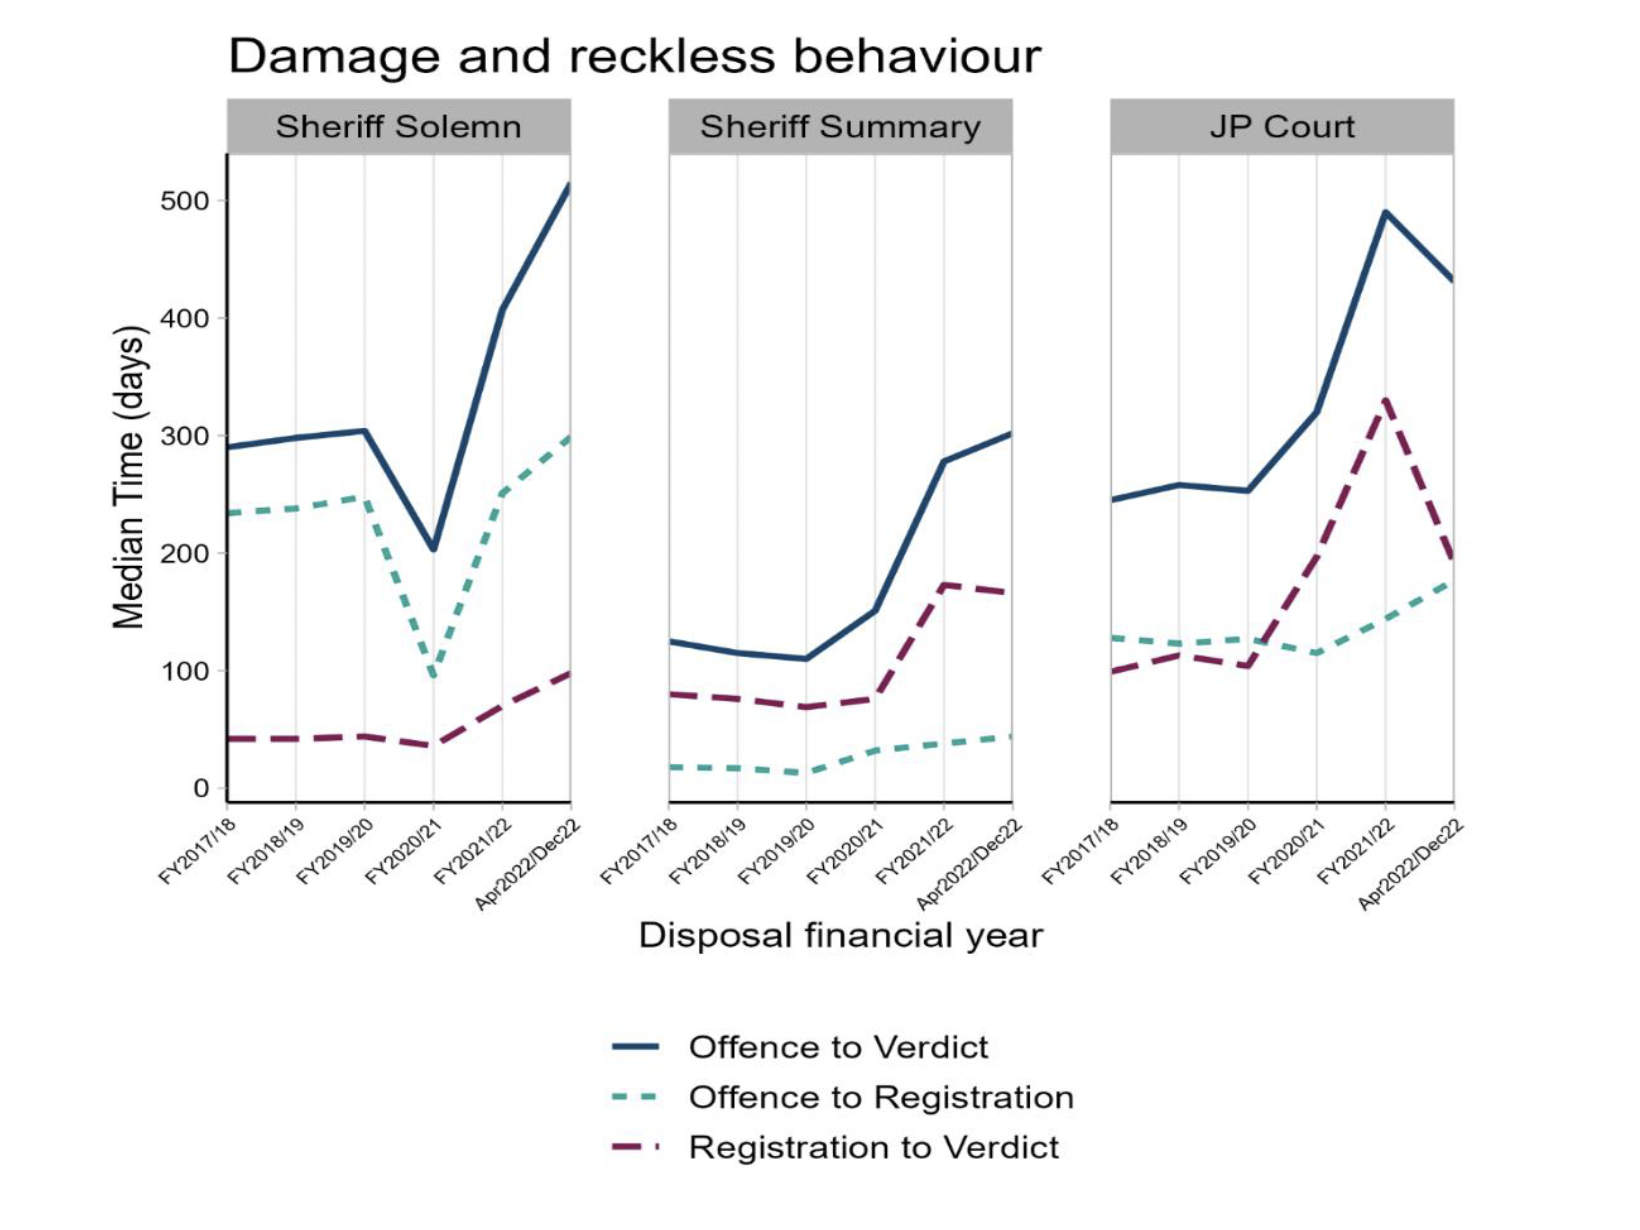 Figure 11: Three line charts showing offence to verdict, offence to registration and registration to verdict median times for accused with reckless behaviour in Sheriff Solemn, Sheriff Summary and JP Court showing that all times have increased since the beginning of COVID-19 pandemic.